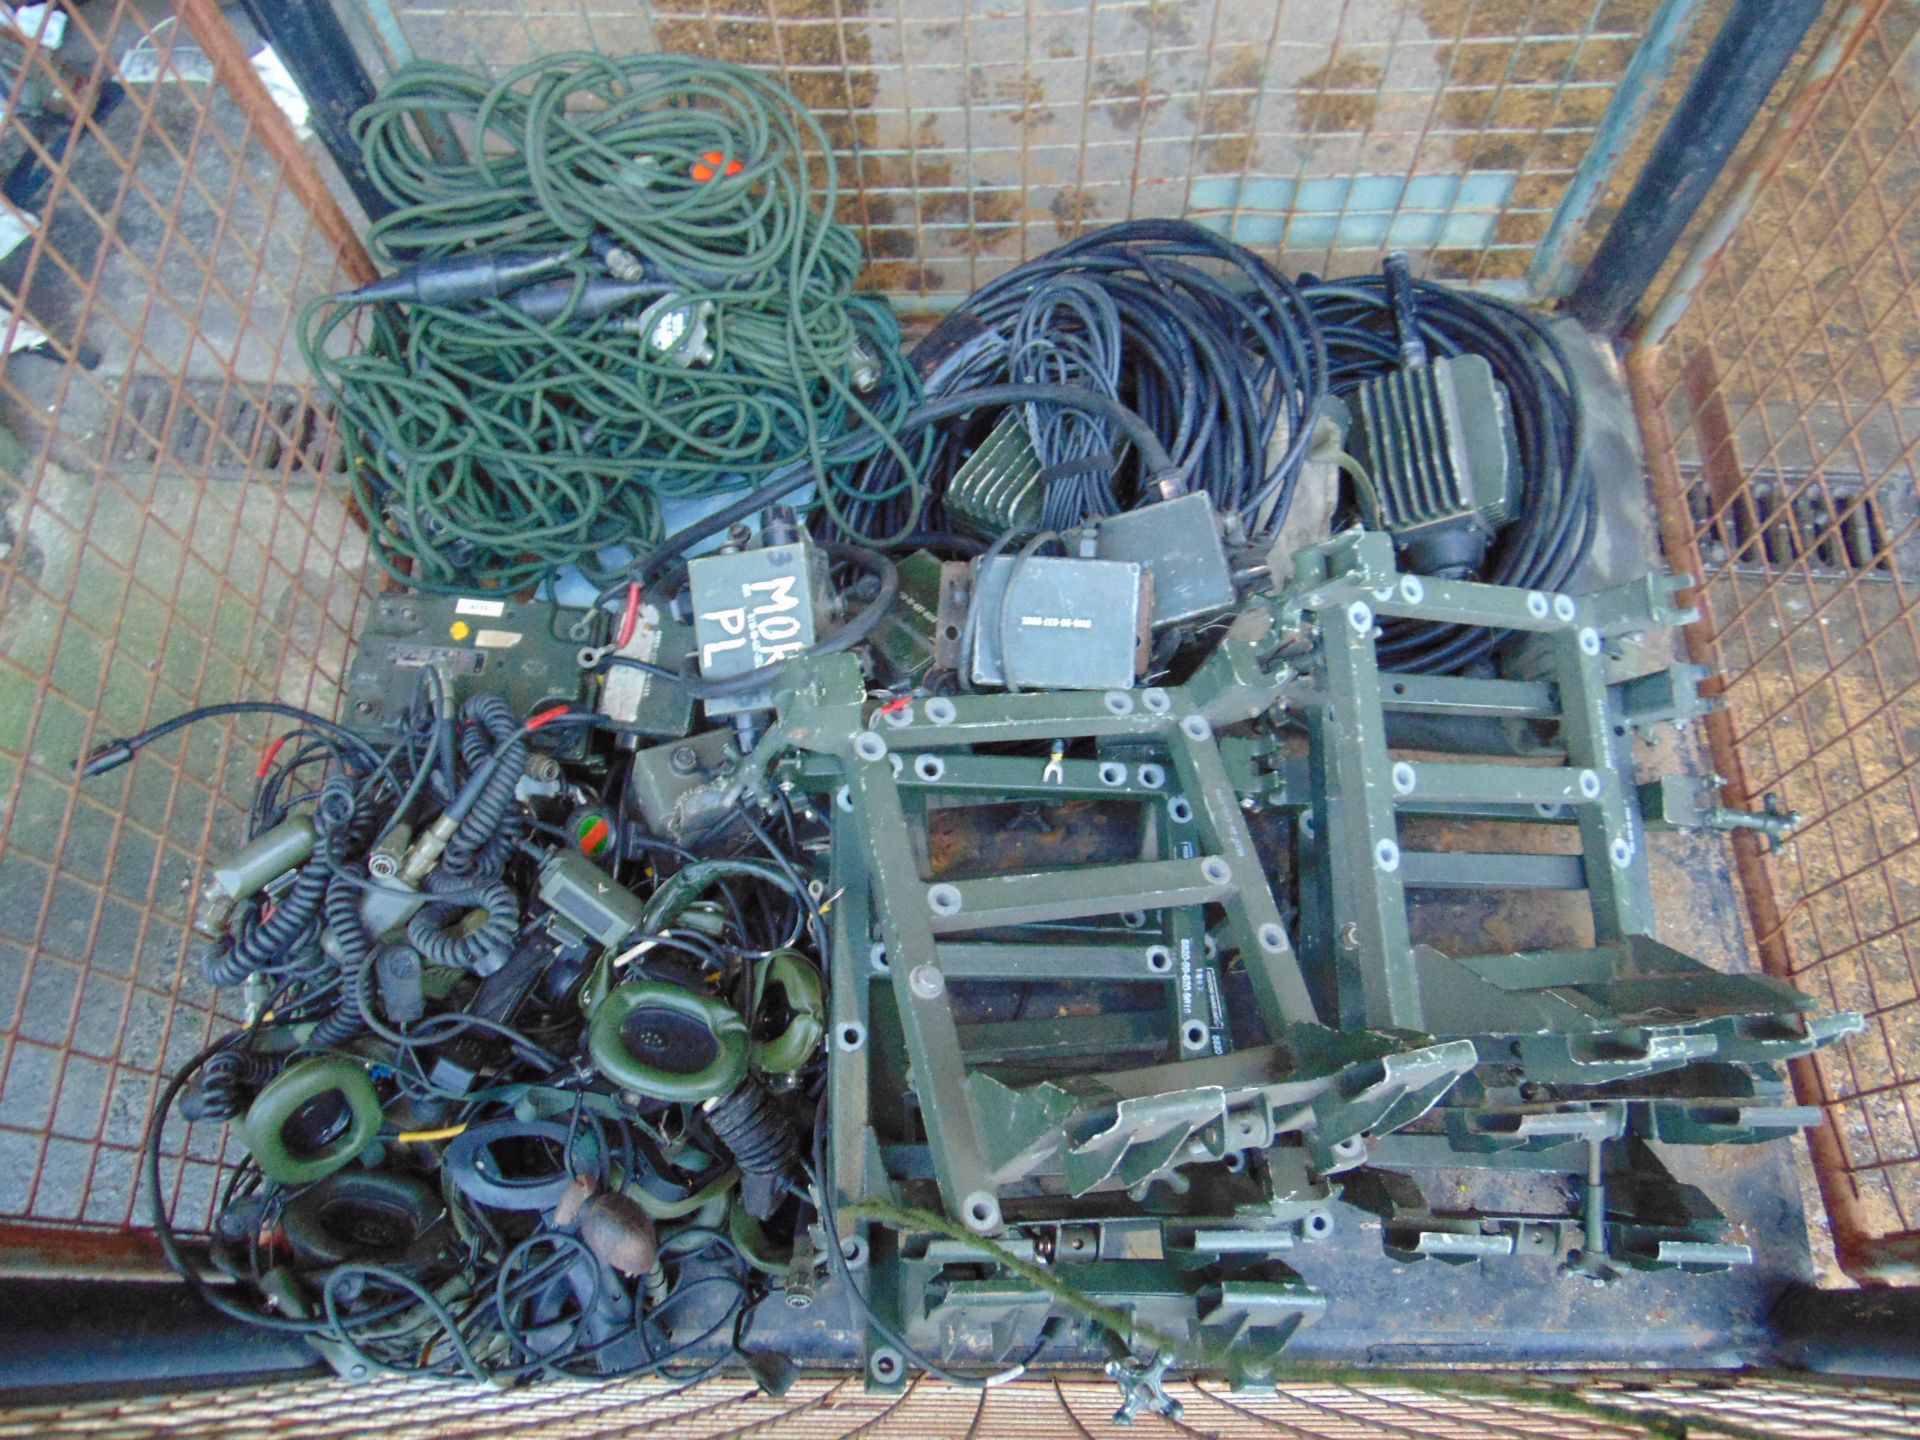 Stillage of Clansman Radio Equipment inc Headsets, Cable Antenna kits Ect - Image 2 of 7